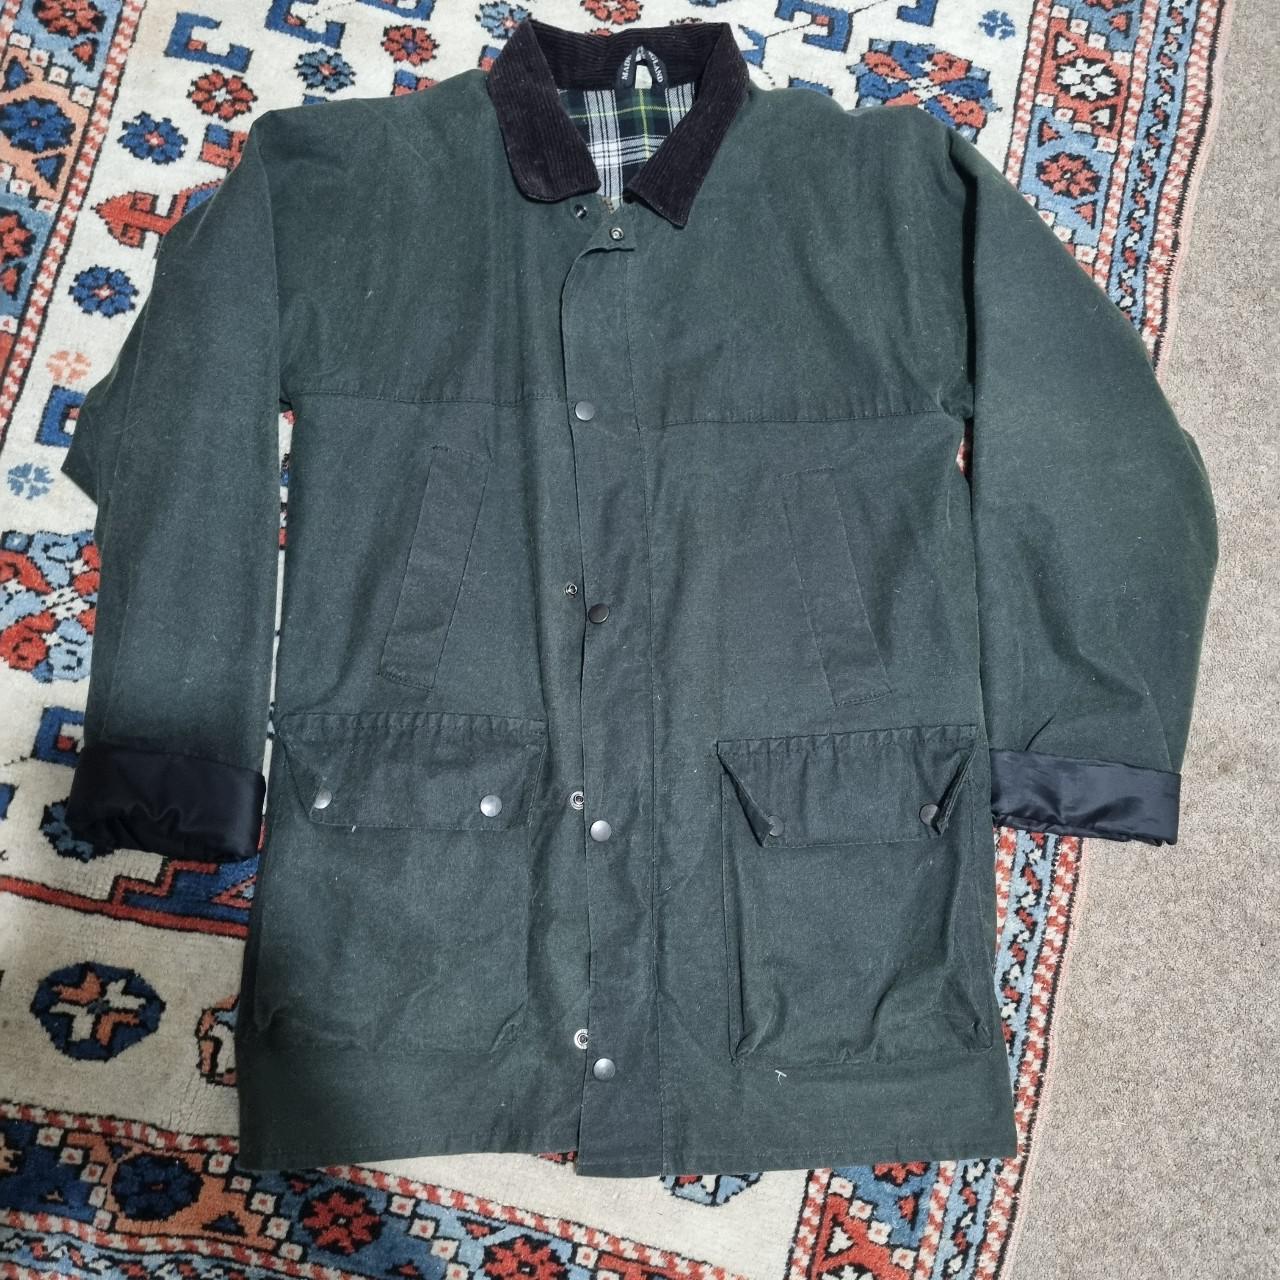 Wax Jacket S in size perfect condition. - Depop